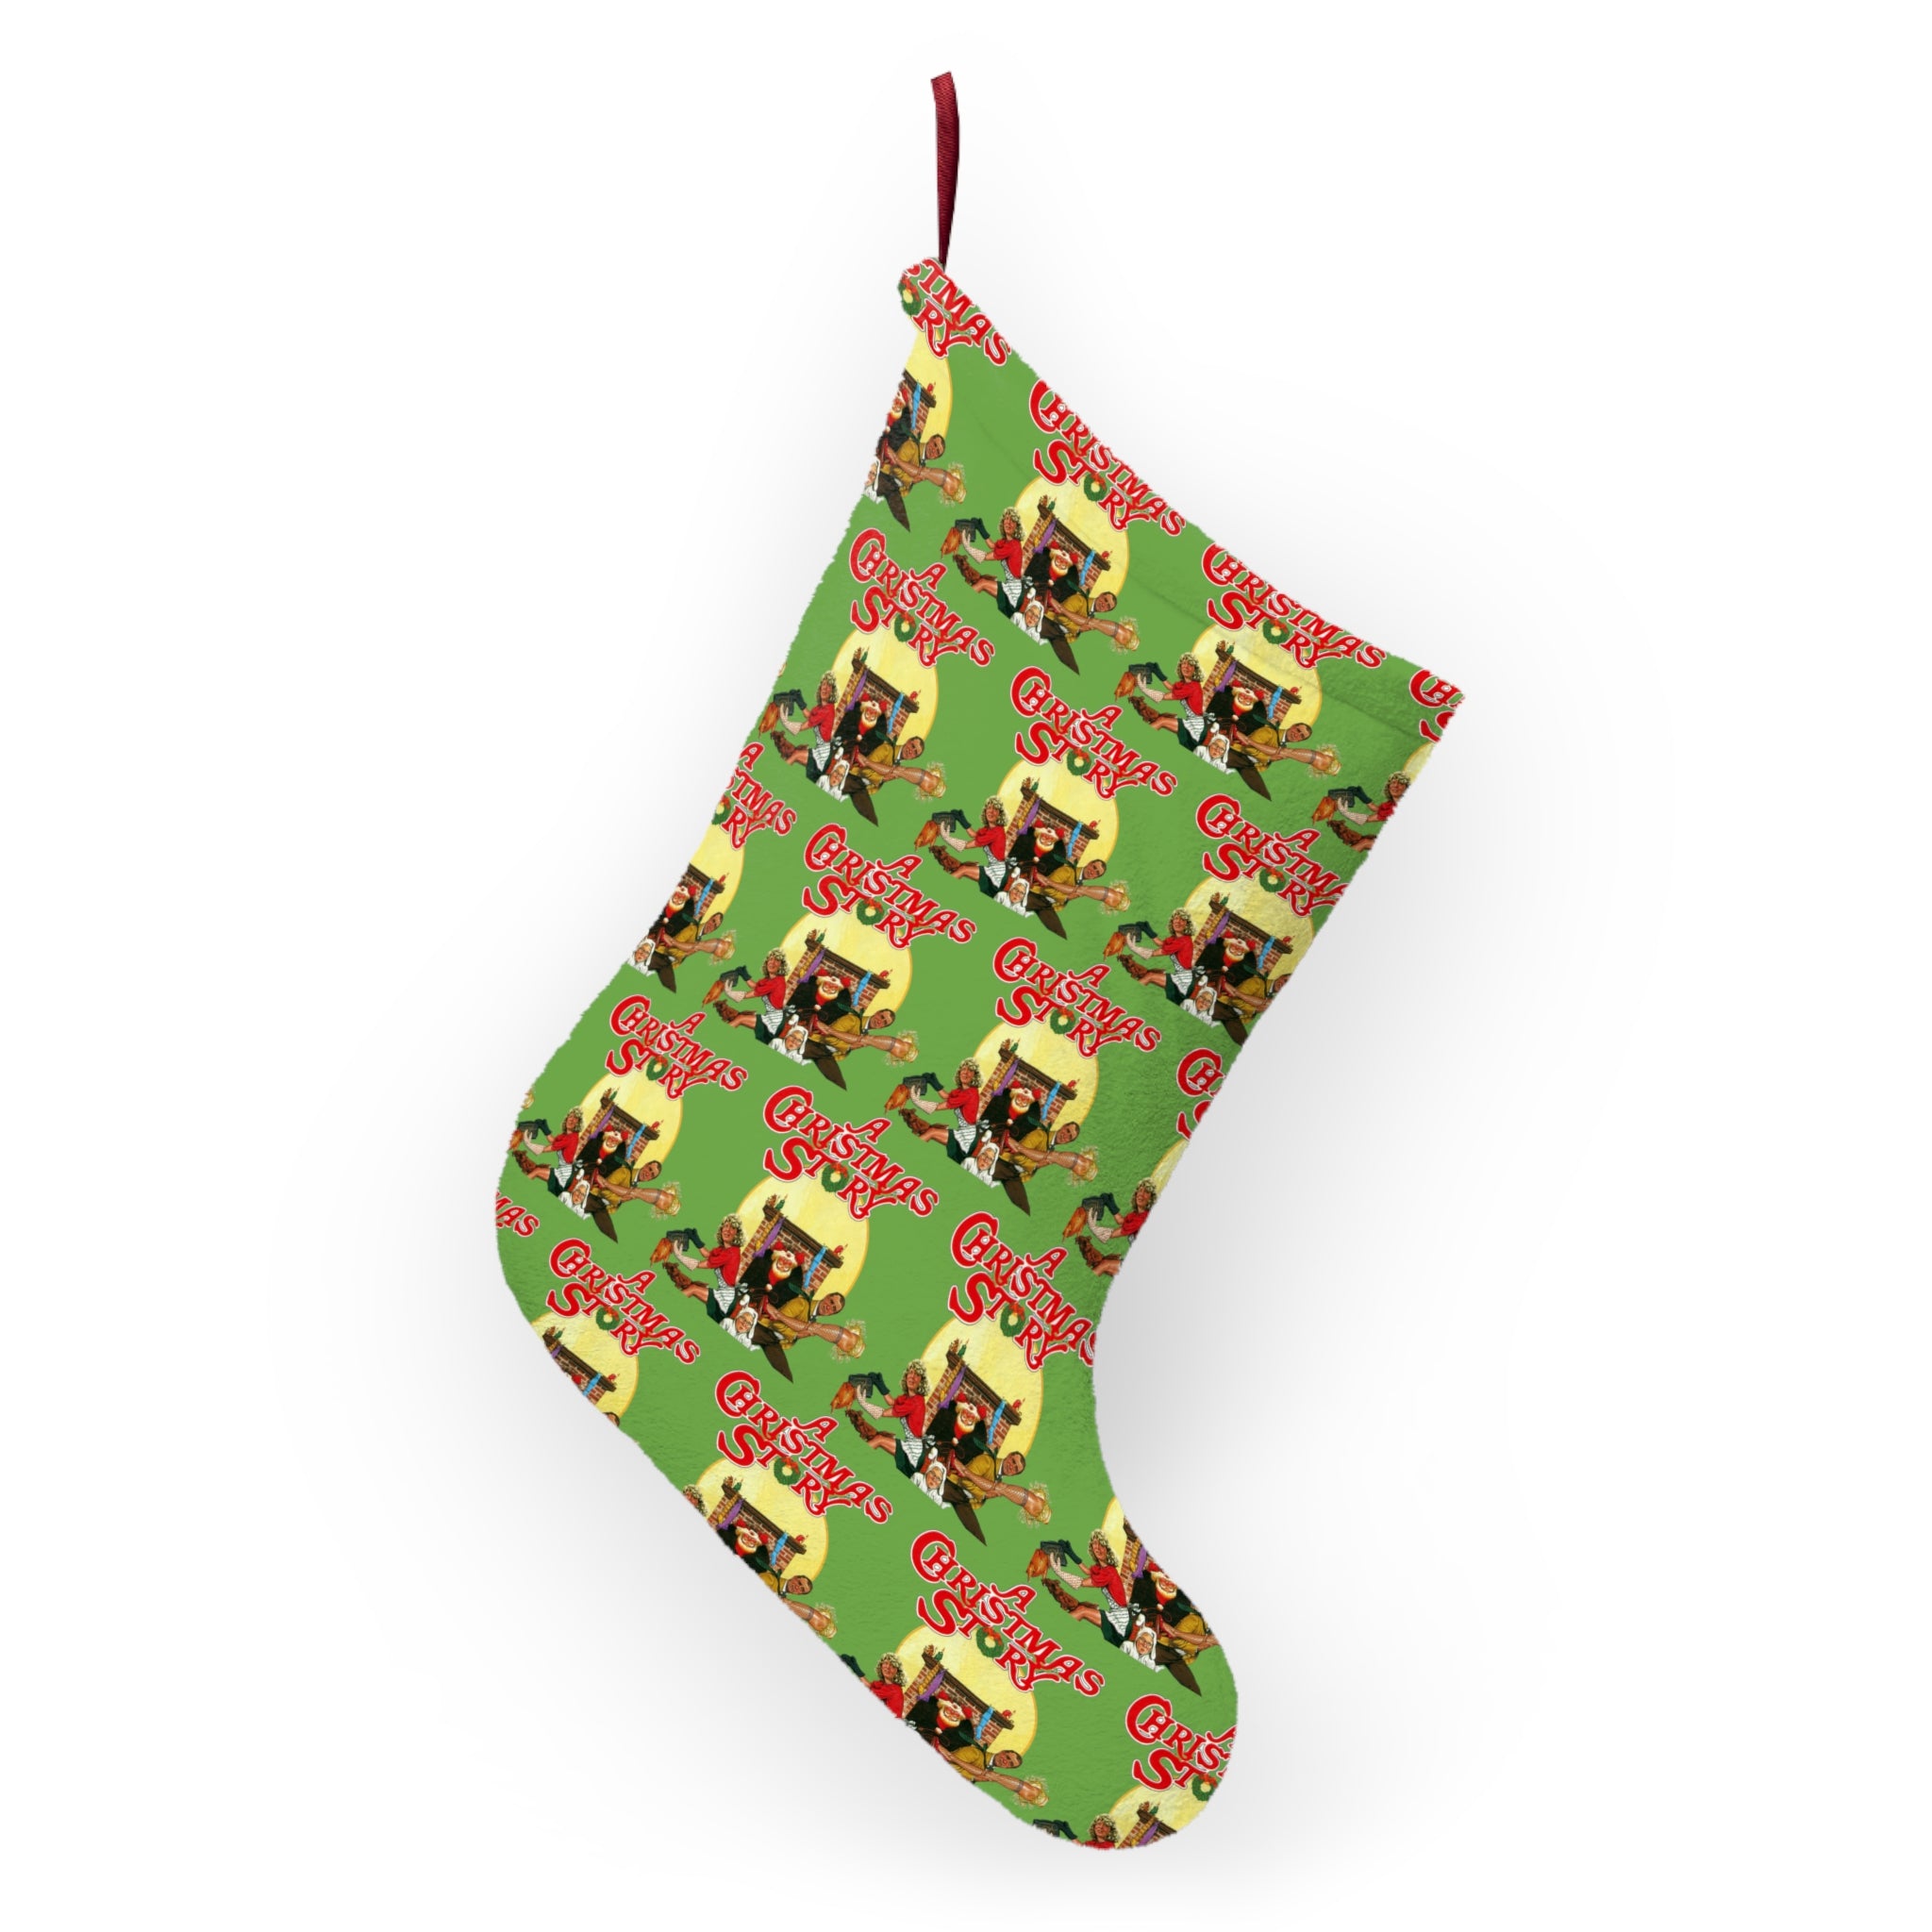 https://creationsbychrisandcarlos.store/products/a-christmas-story-christmas-stocking